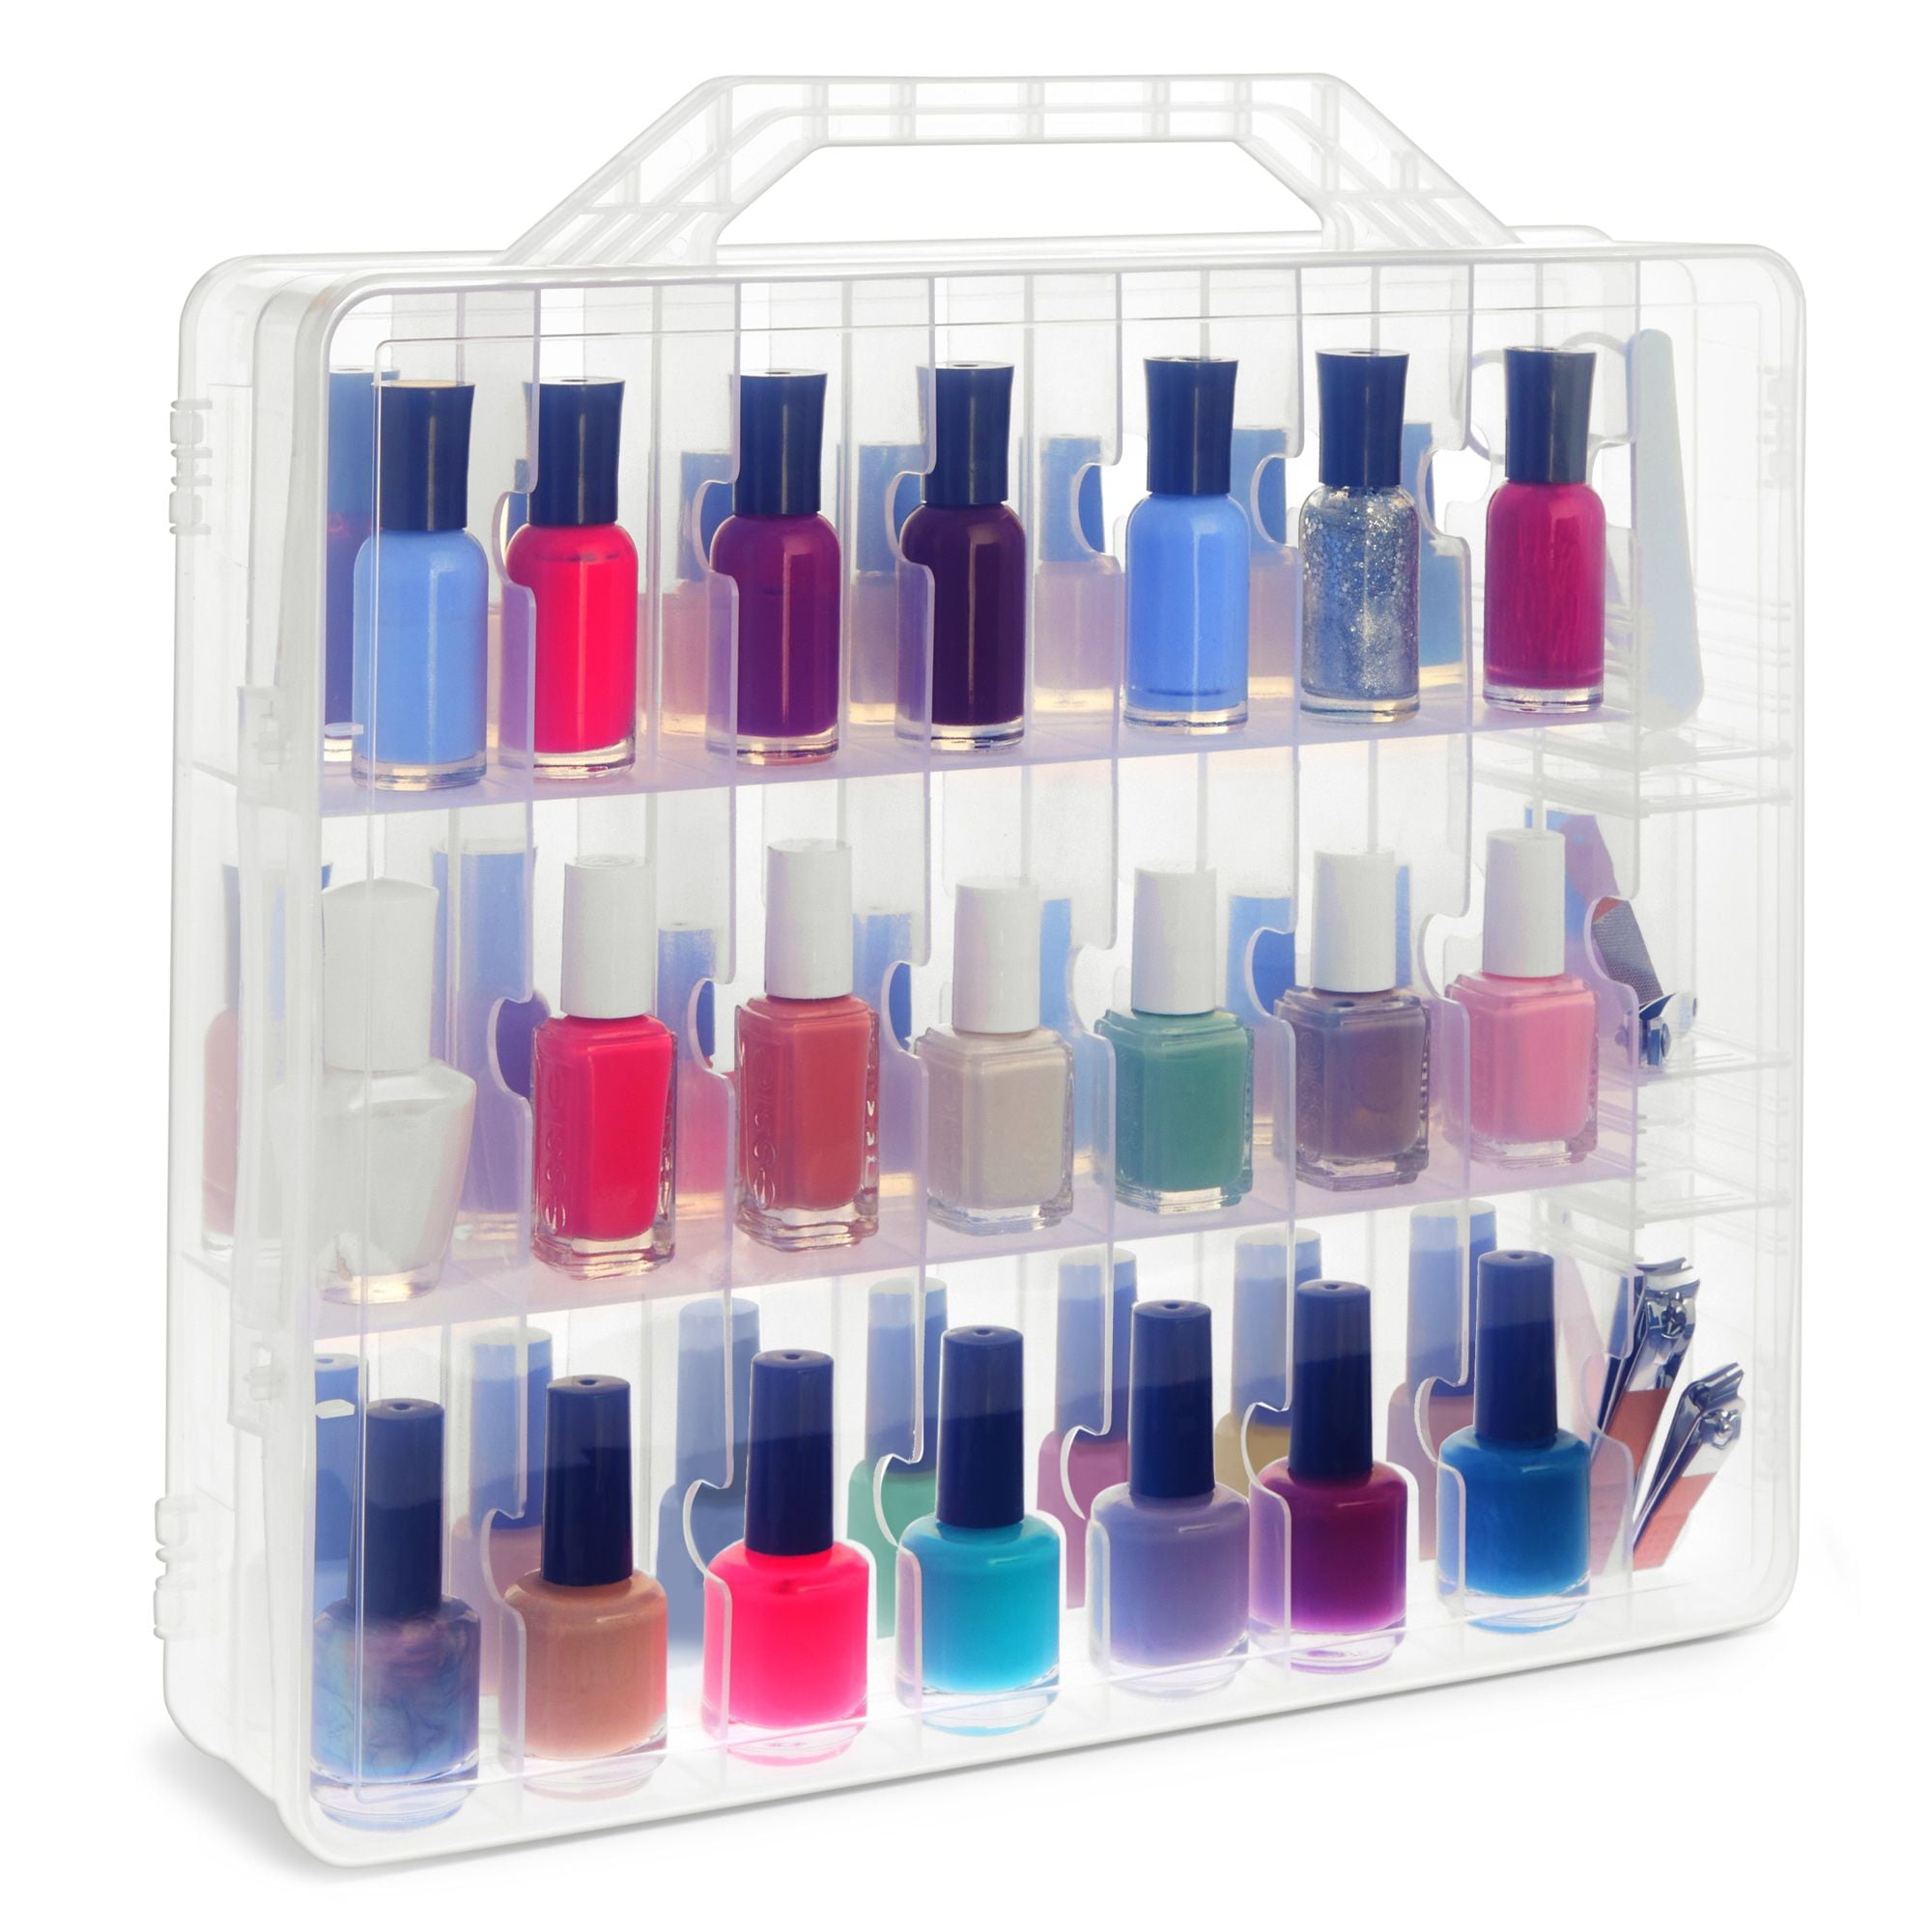 15 Nail Polish Organizers and Storage Ideas for 2023